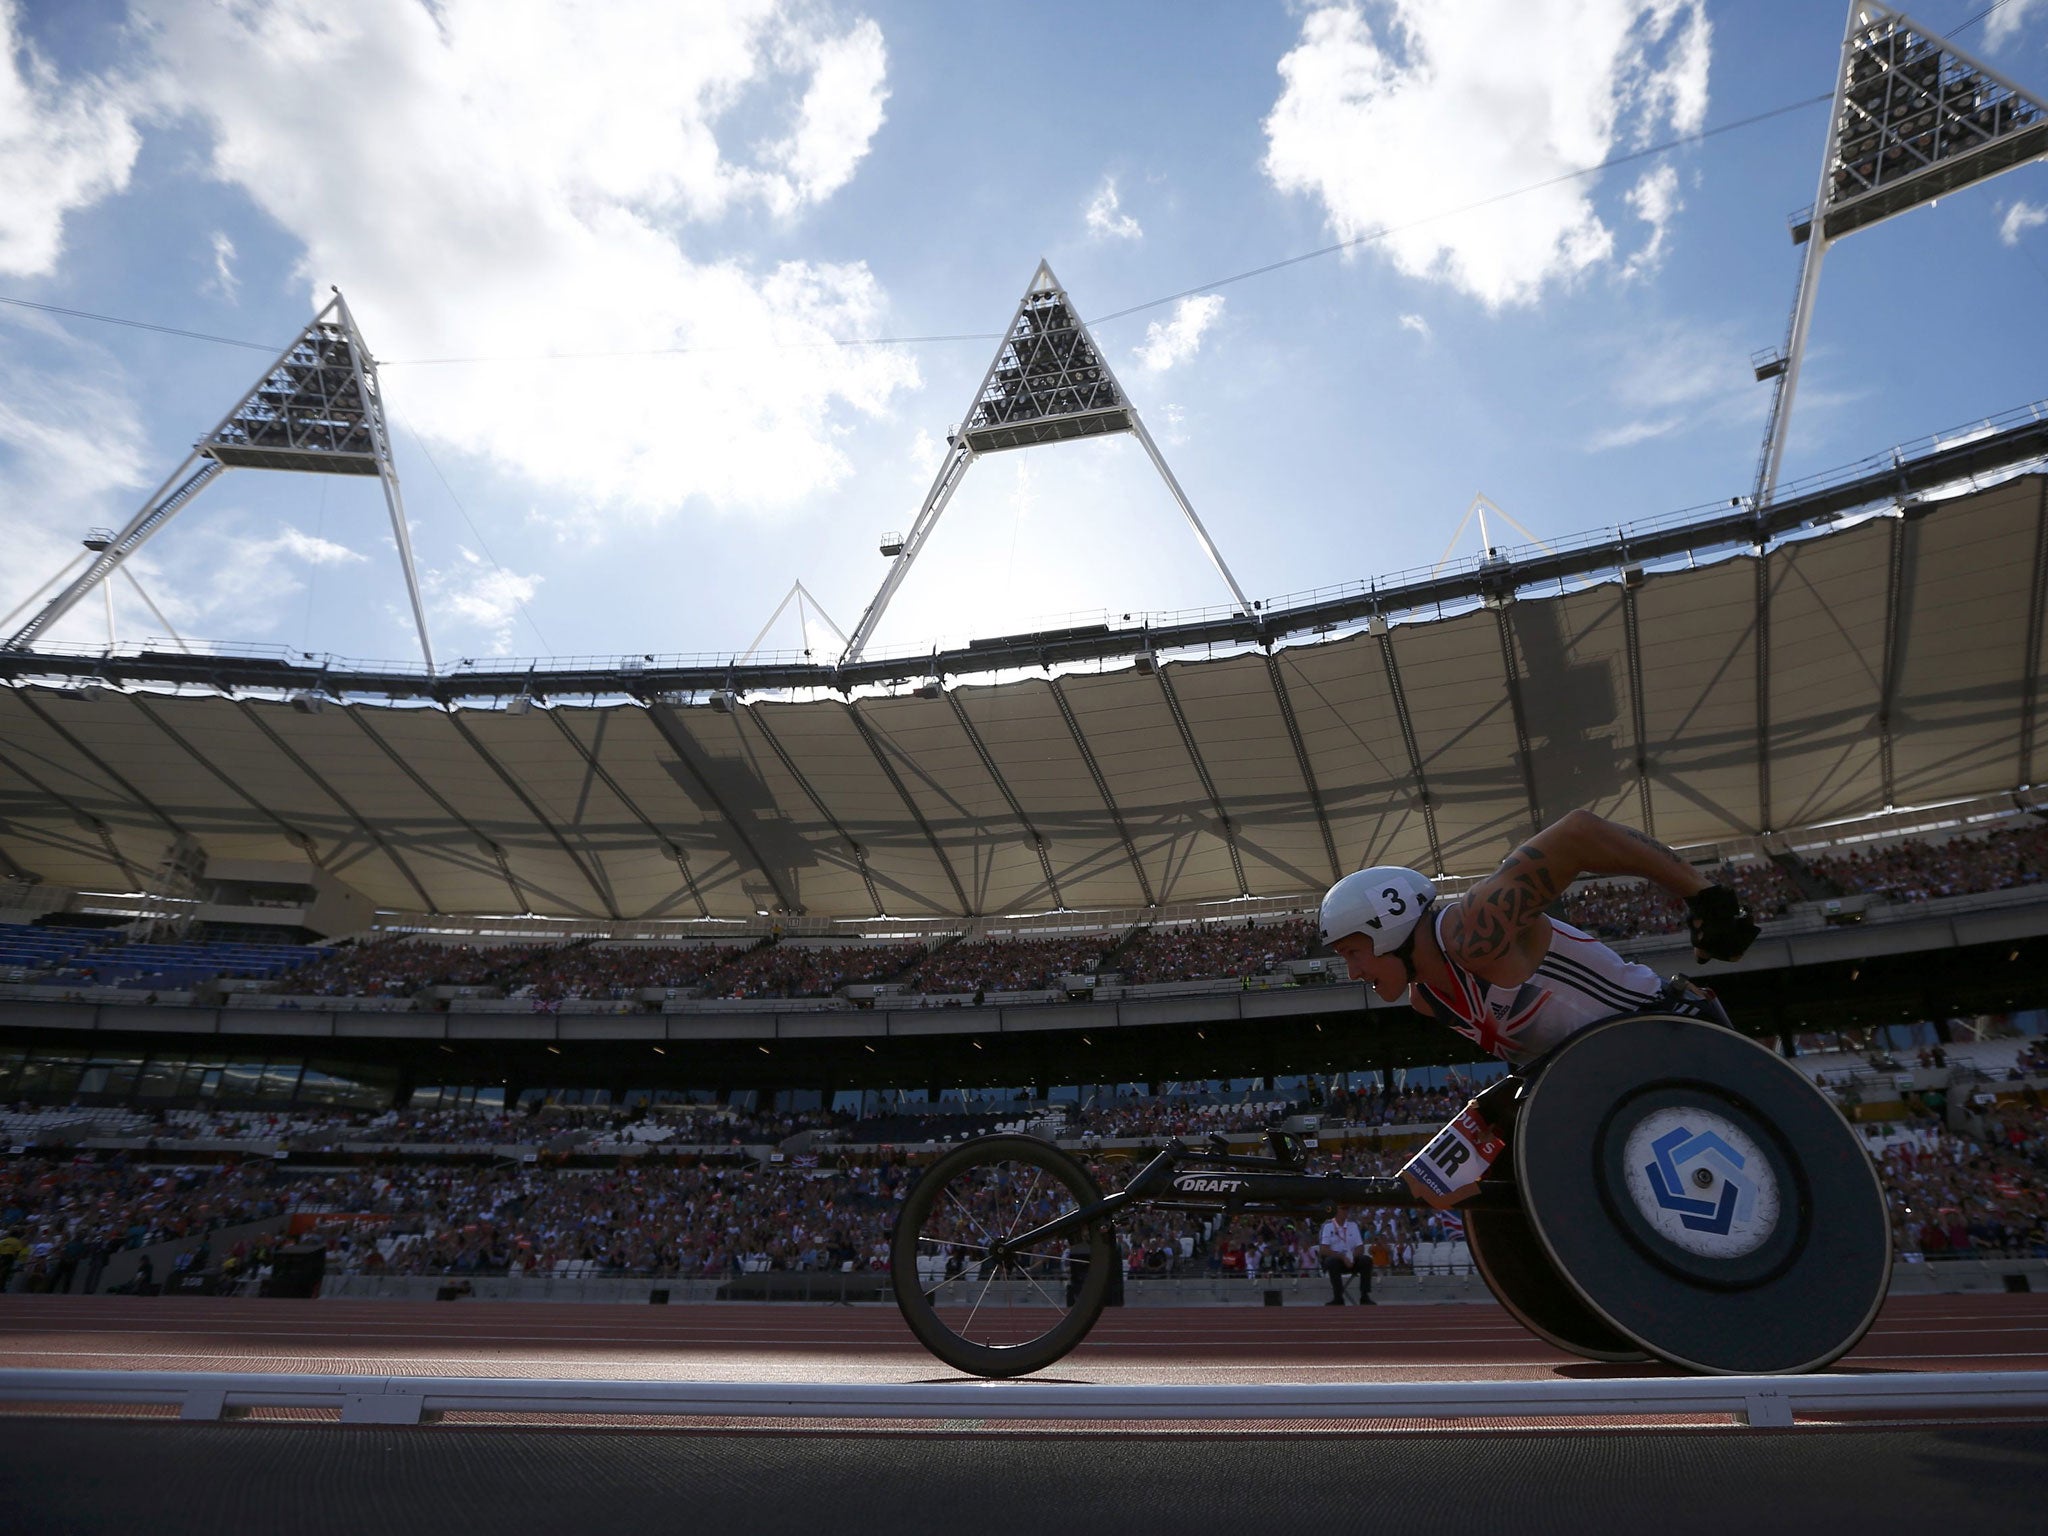 David Weir on his way to victory in the men’s T54 mile during the Anniversary Games